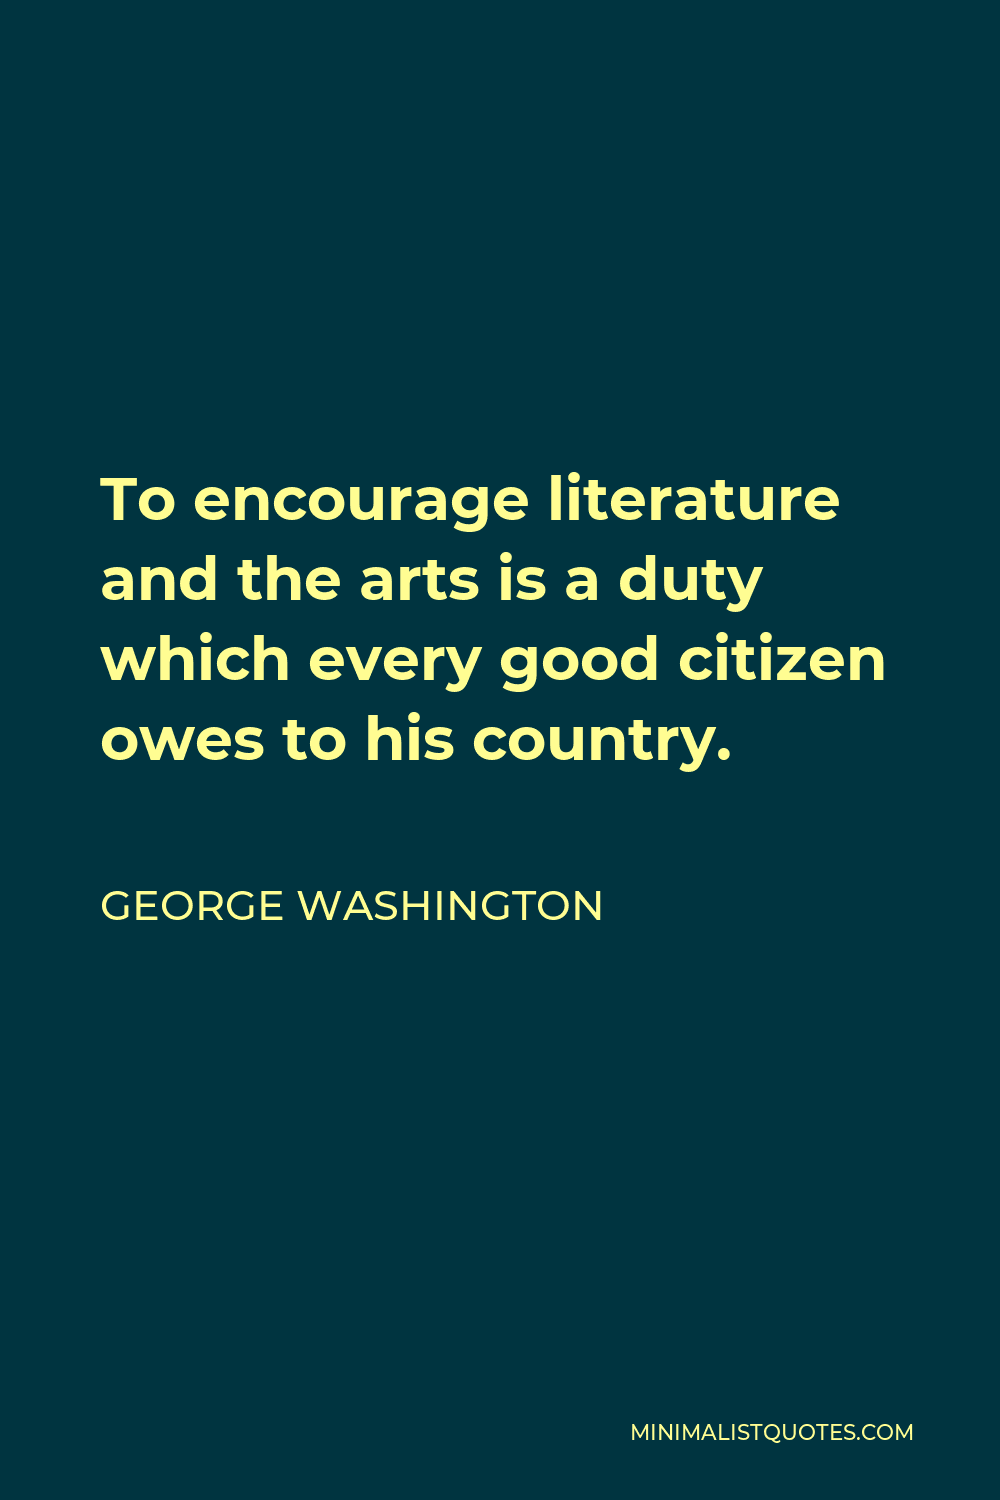 George Washington Quote - To encourage literature and the arts is a duty which every good citizen owes to his country.